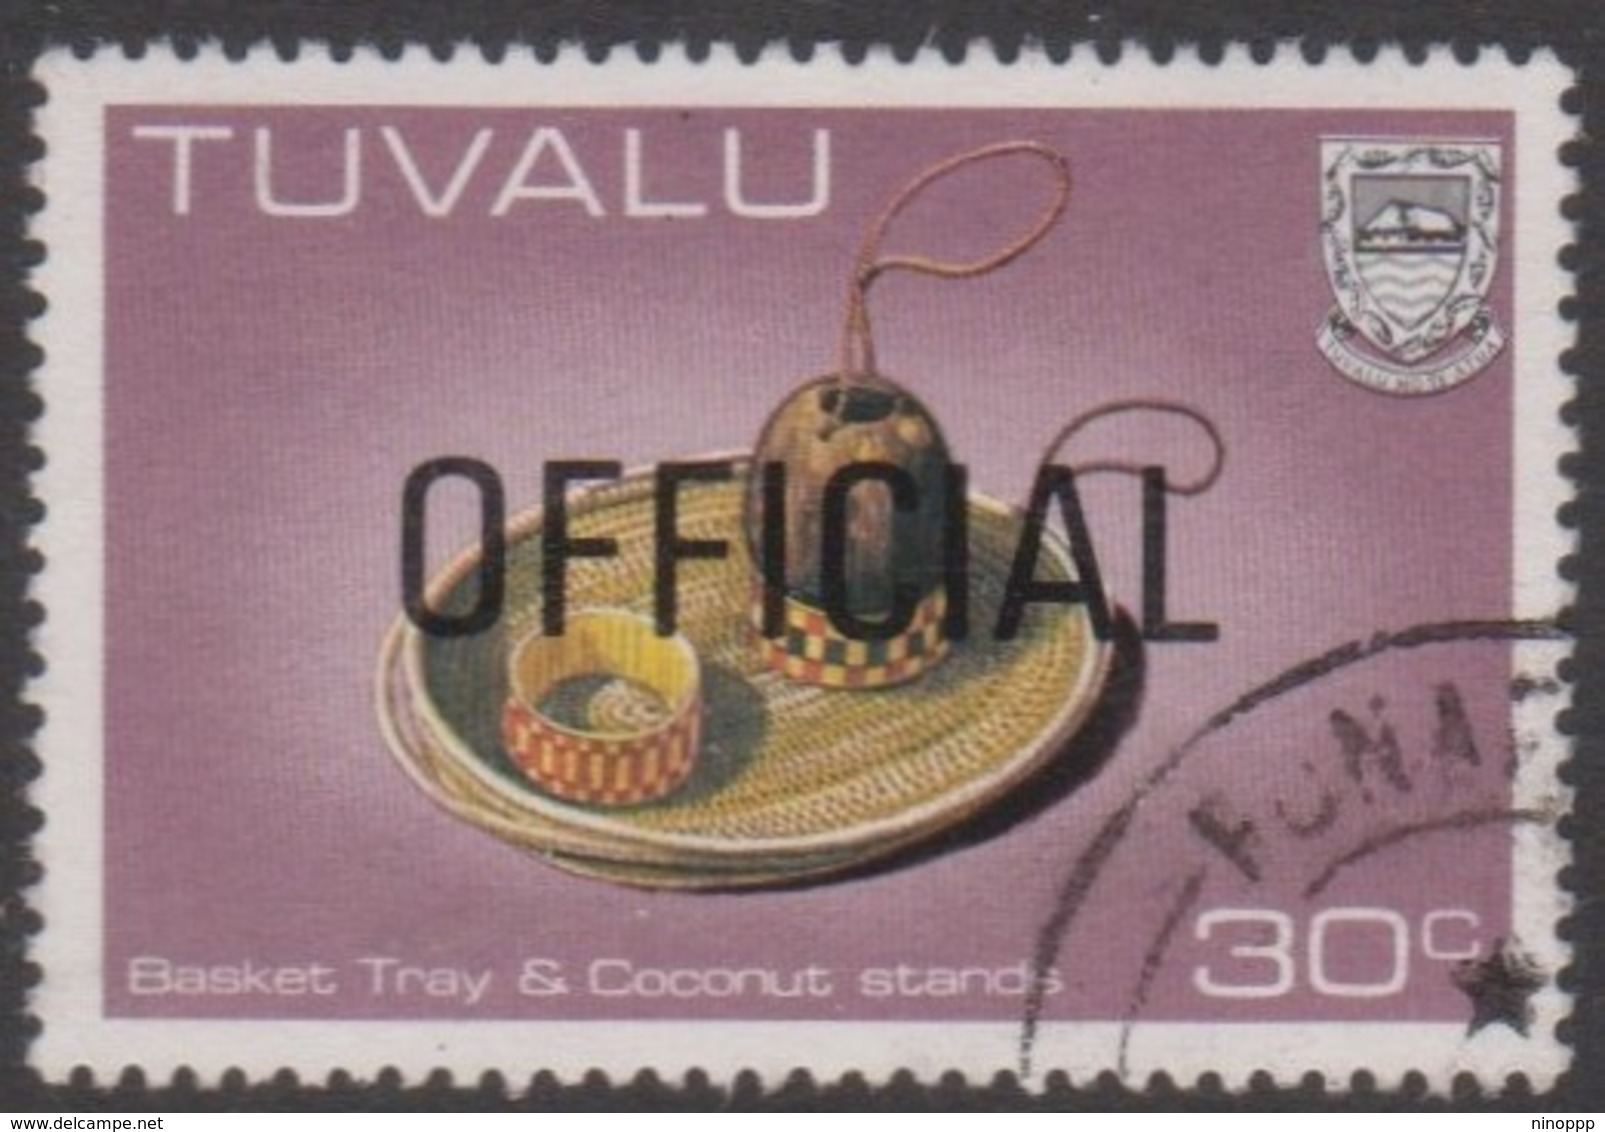 Tuvalu SG O 24 1983 OFFICIAL,30c Reef Sandals, Overprinted Official, Used - Tuvalu